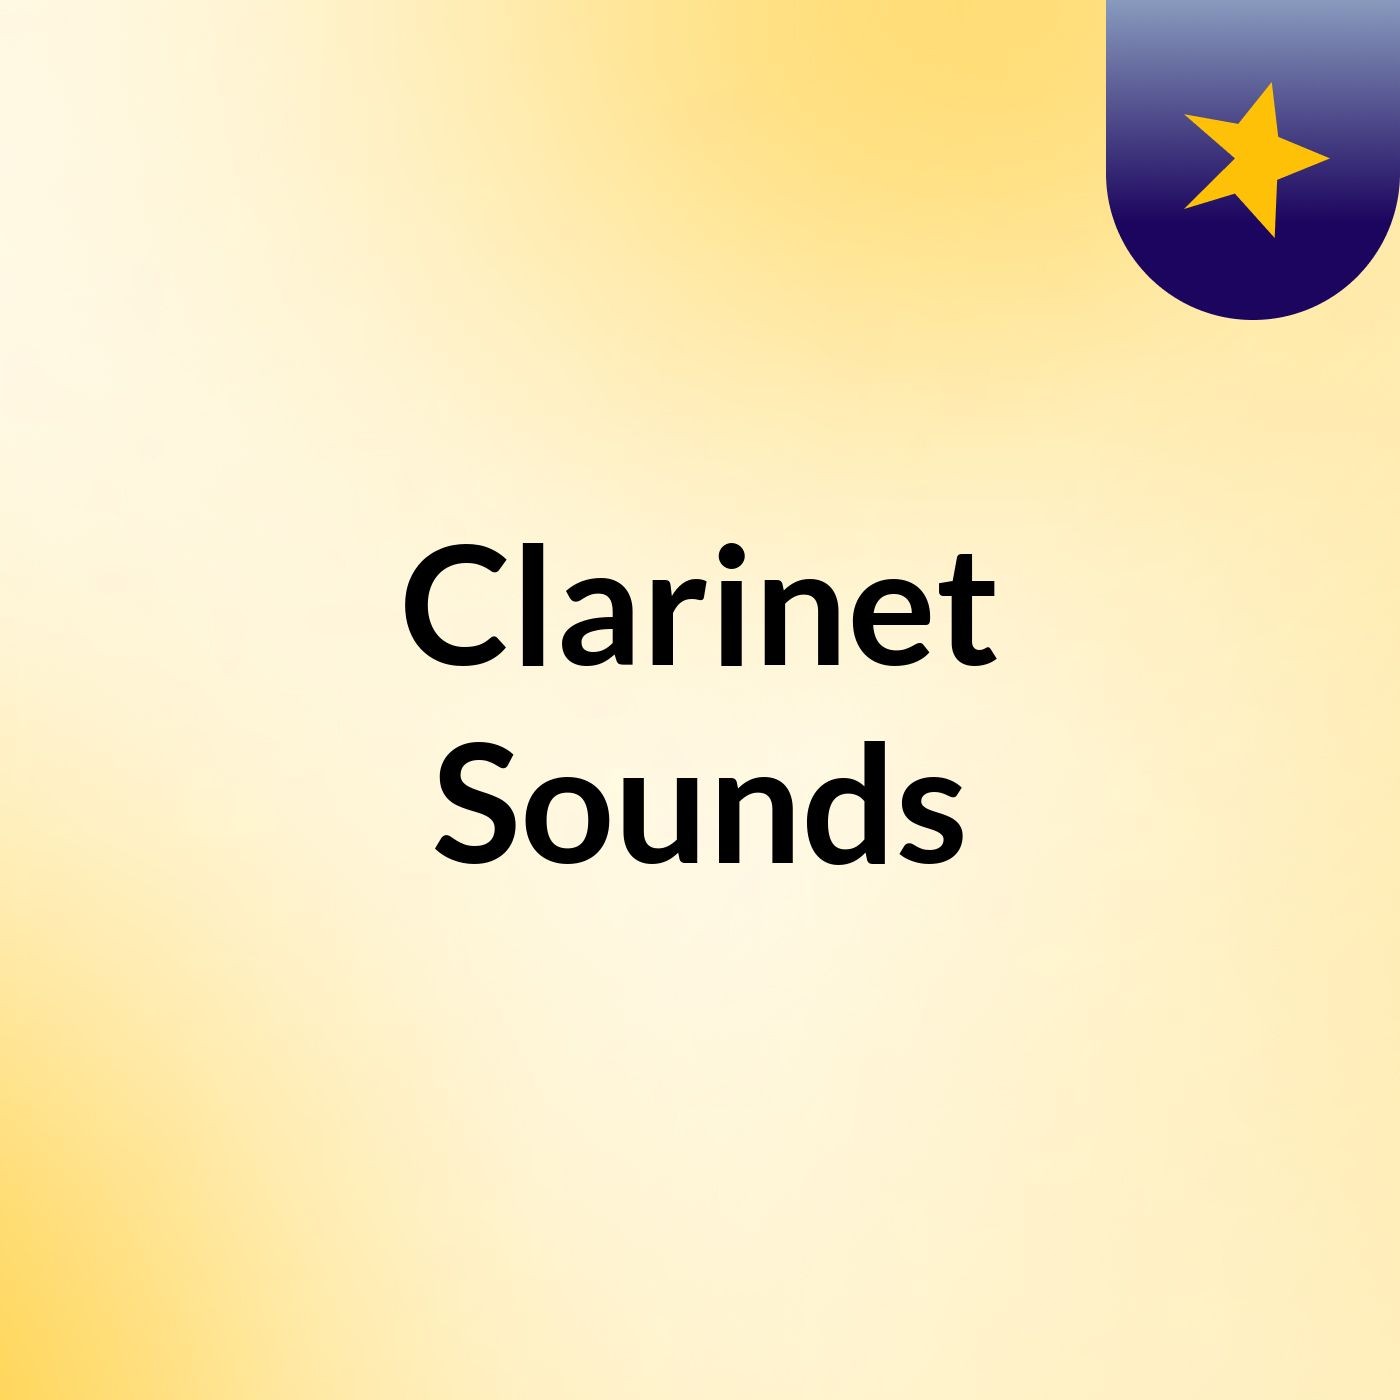 Clarinet Sounds